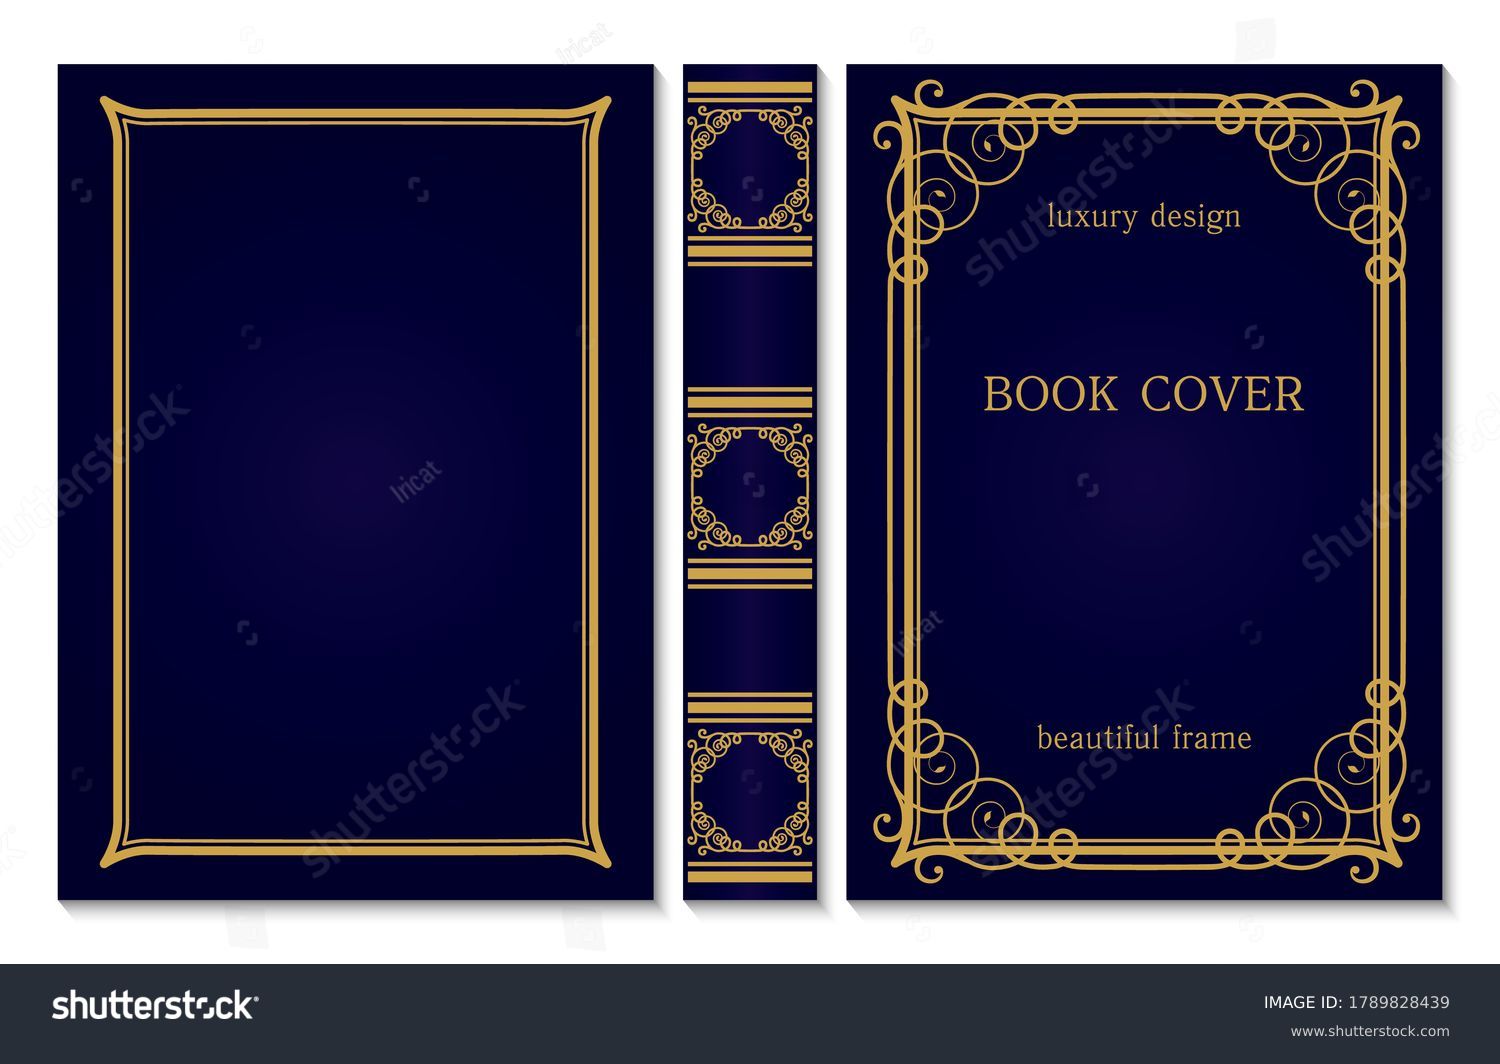 204-581-vintage-book-cover-template-images-stock-photos-vectors